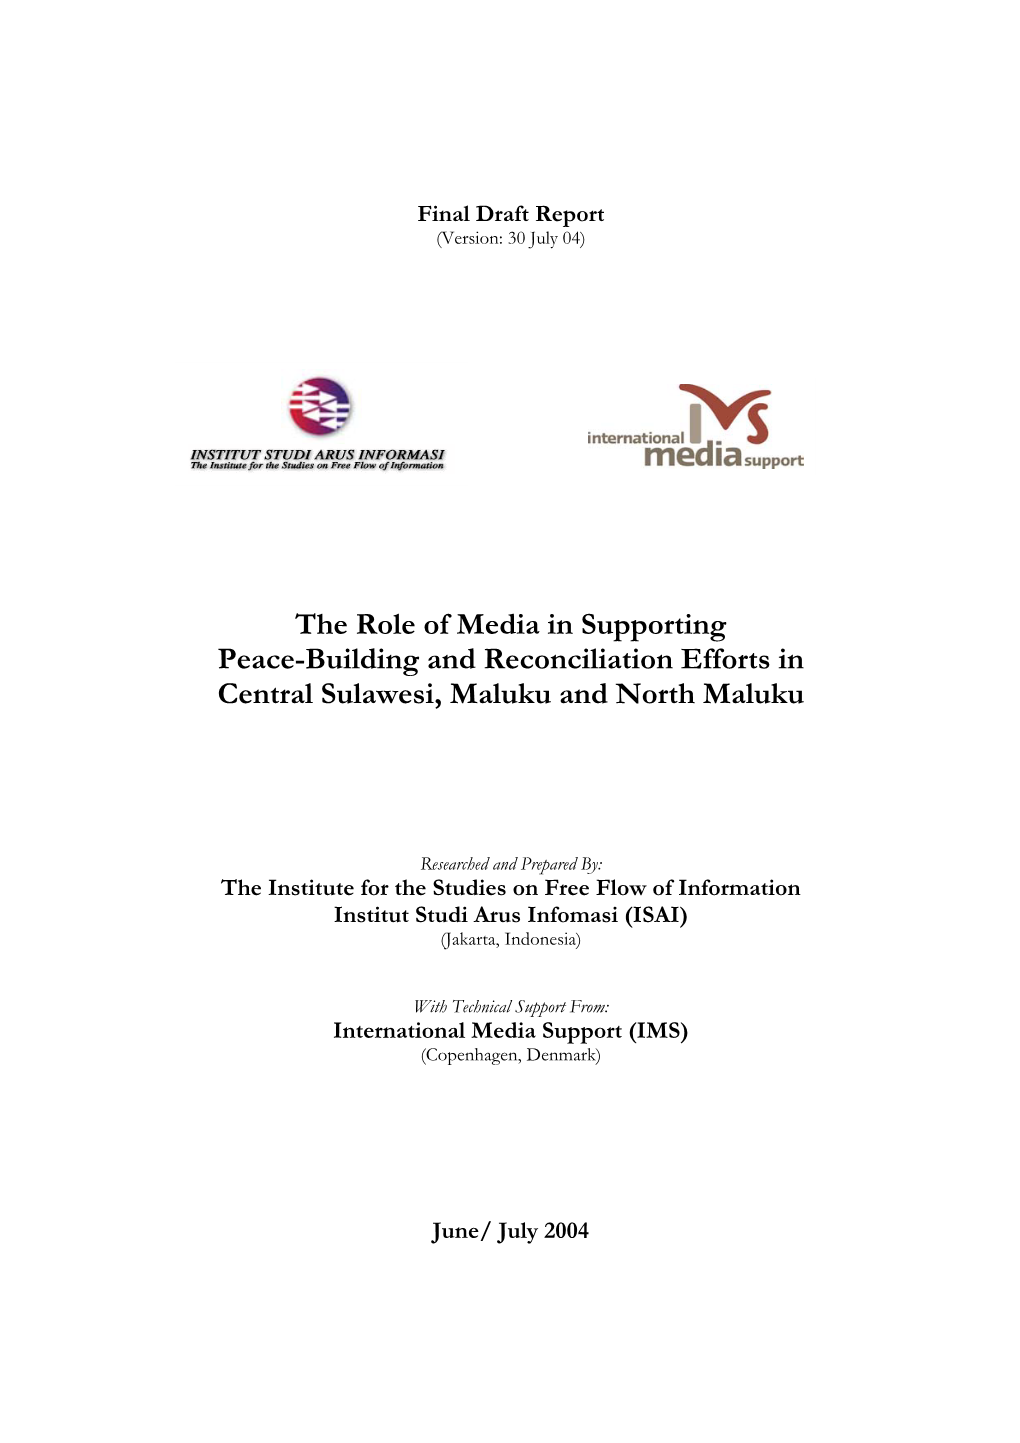 “Assessing the Roles of Media in Supporting Peace